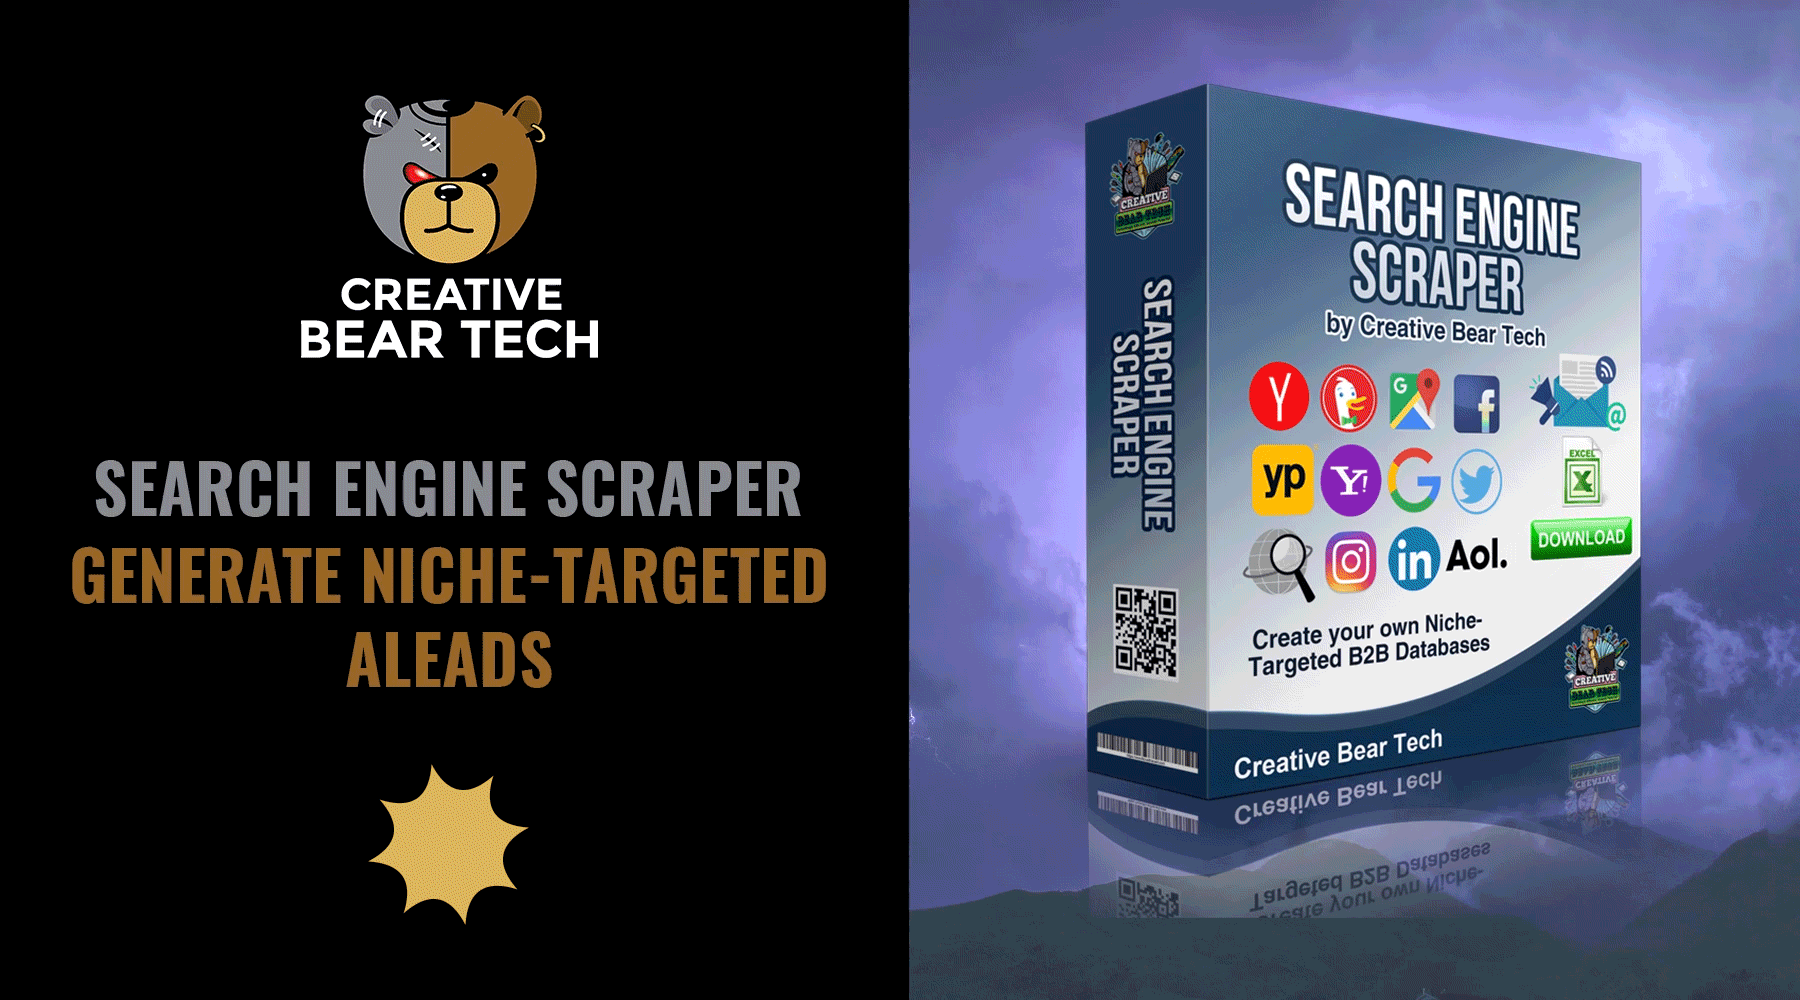 Yandex Search Engine Scraper and Email Extractor by Creative Bear Tech